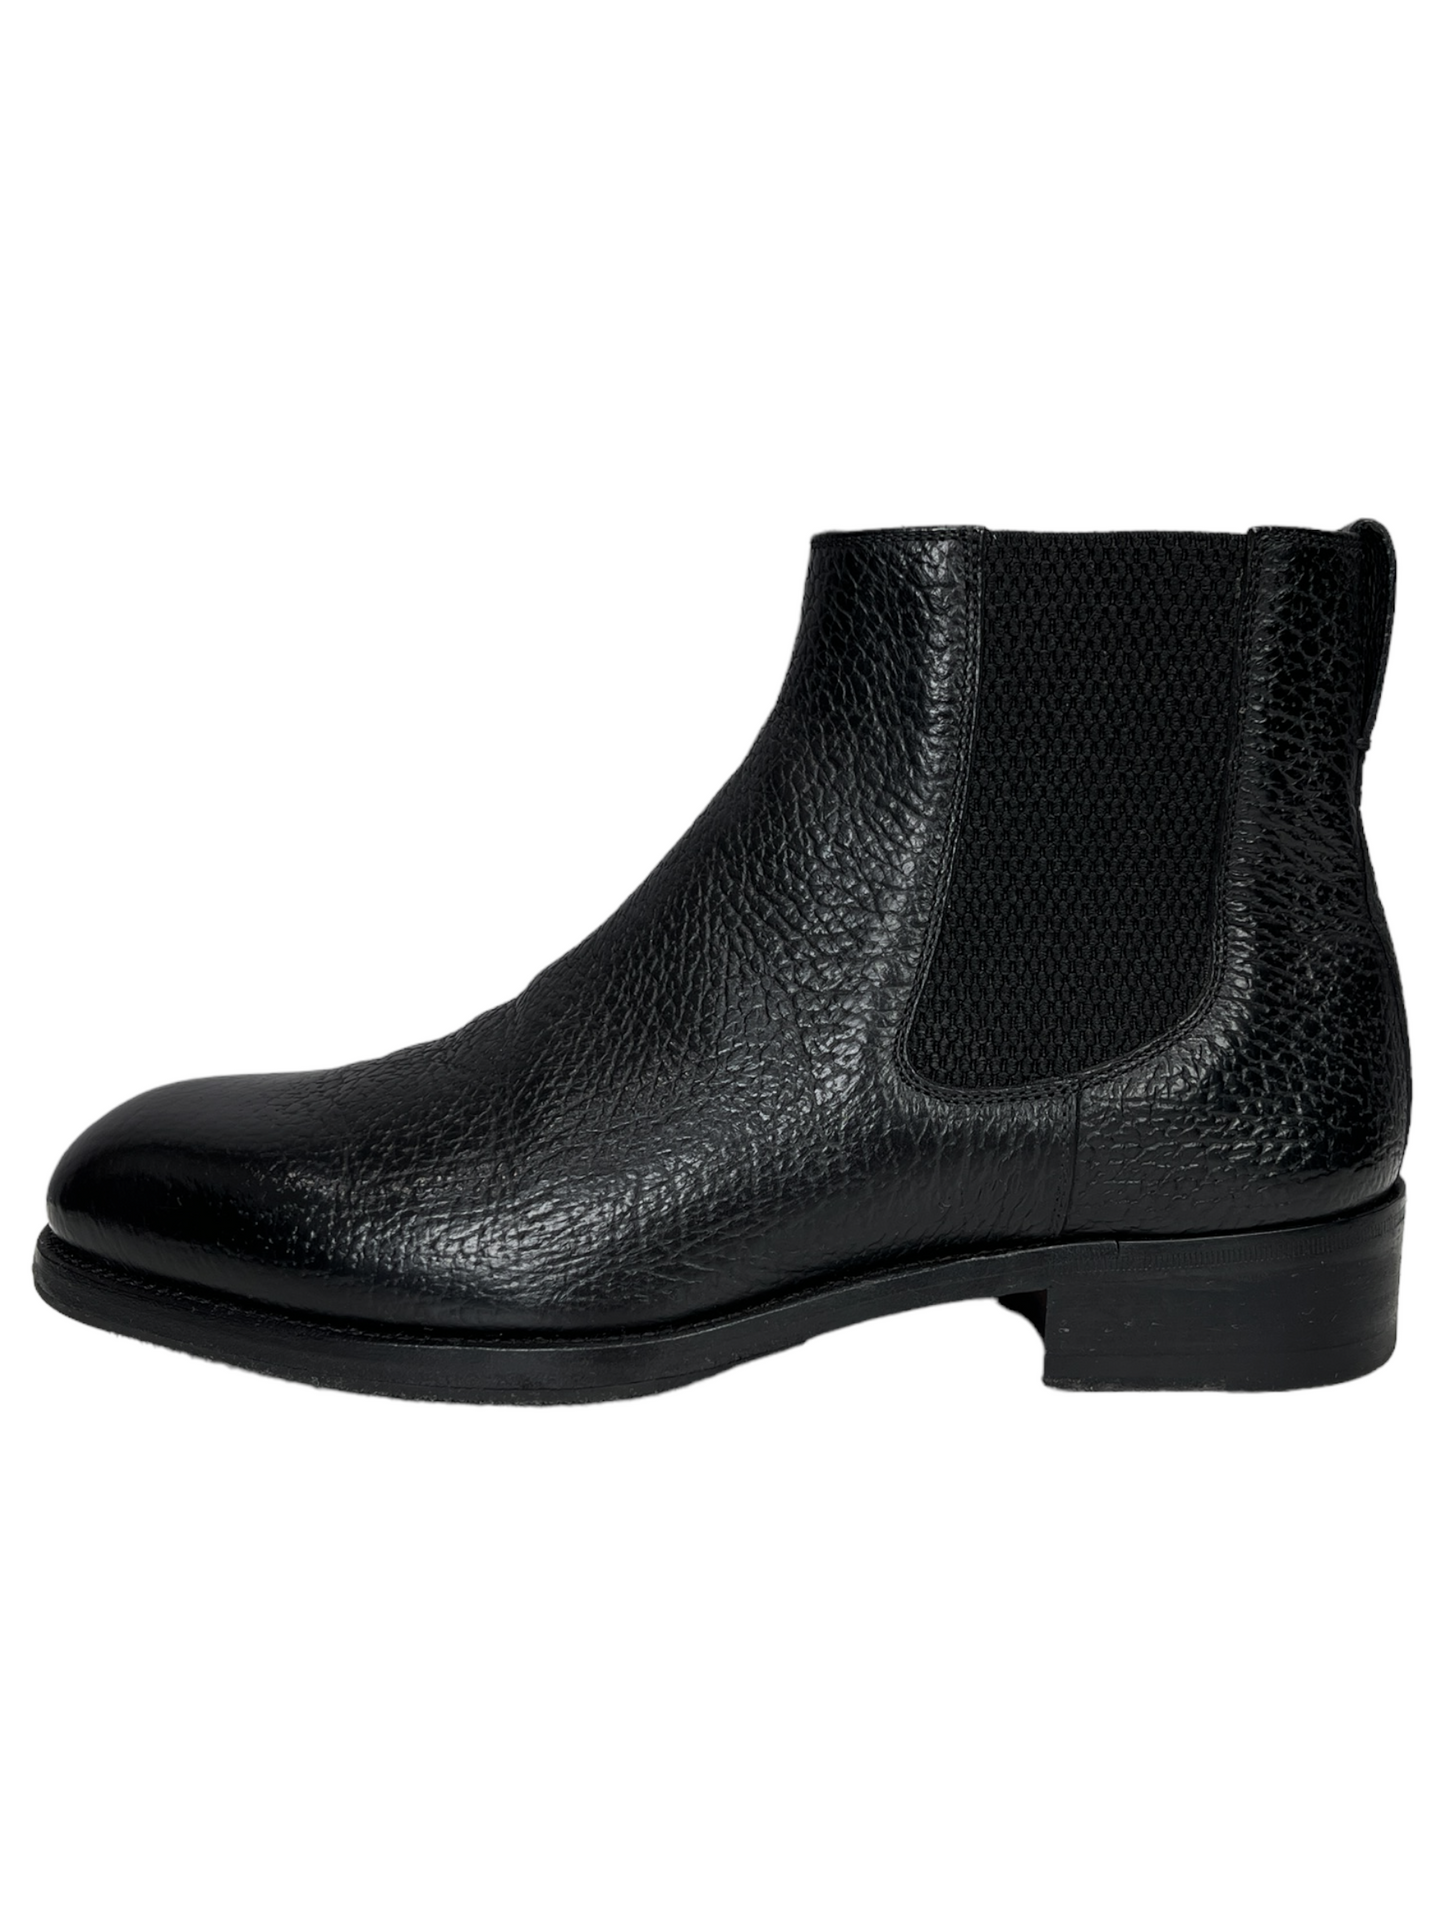 Tom Ford Pebbled Leather Ankle Boot Black 8 US - Genuine Design Luxury Consignment for Men. New & Pre-Owned Clothing, Shoes, & Accessories. Calgary, Canada